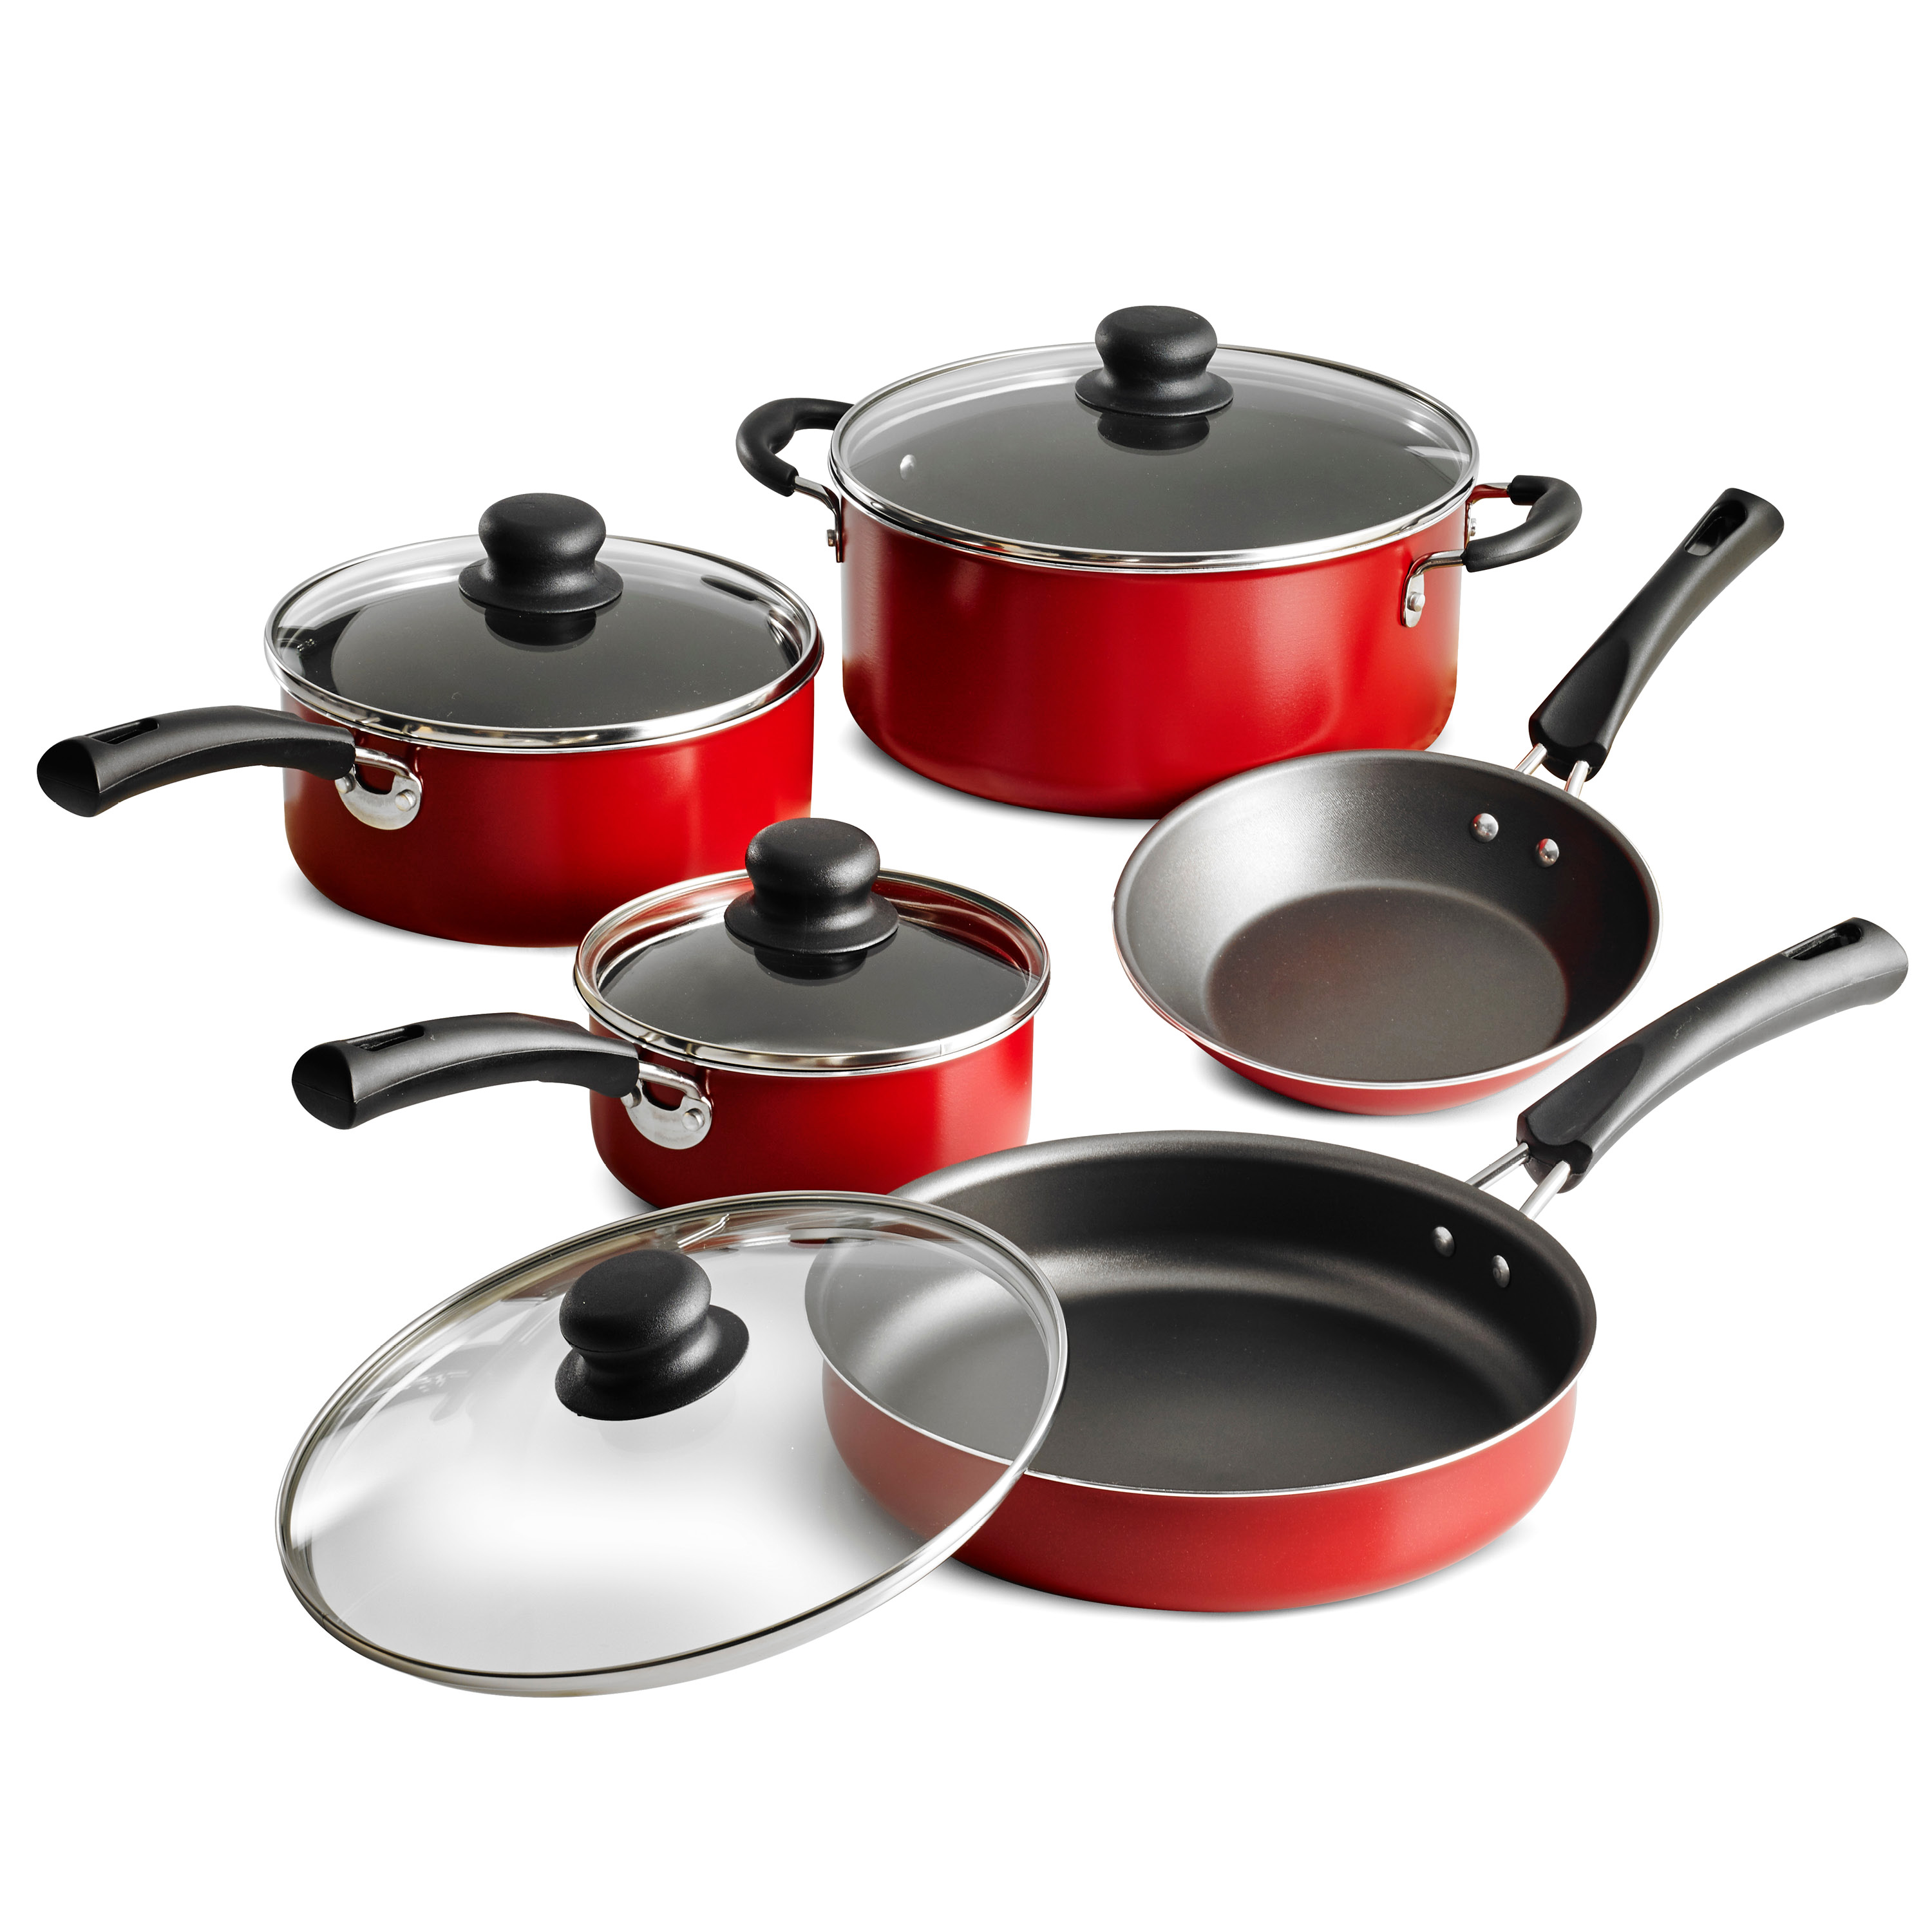 Tramontina 9-Piece Non-stick Cookware Set, Red - image 1 of 6